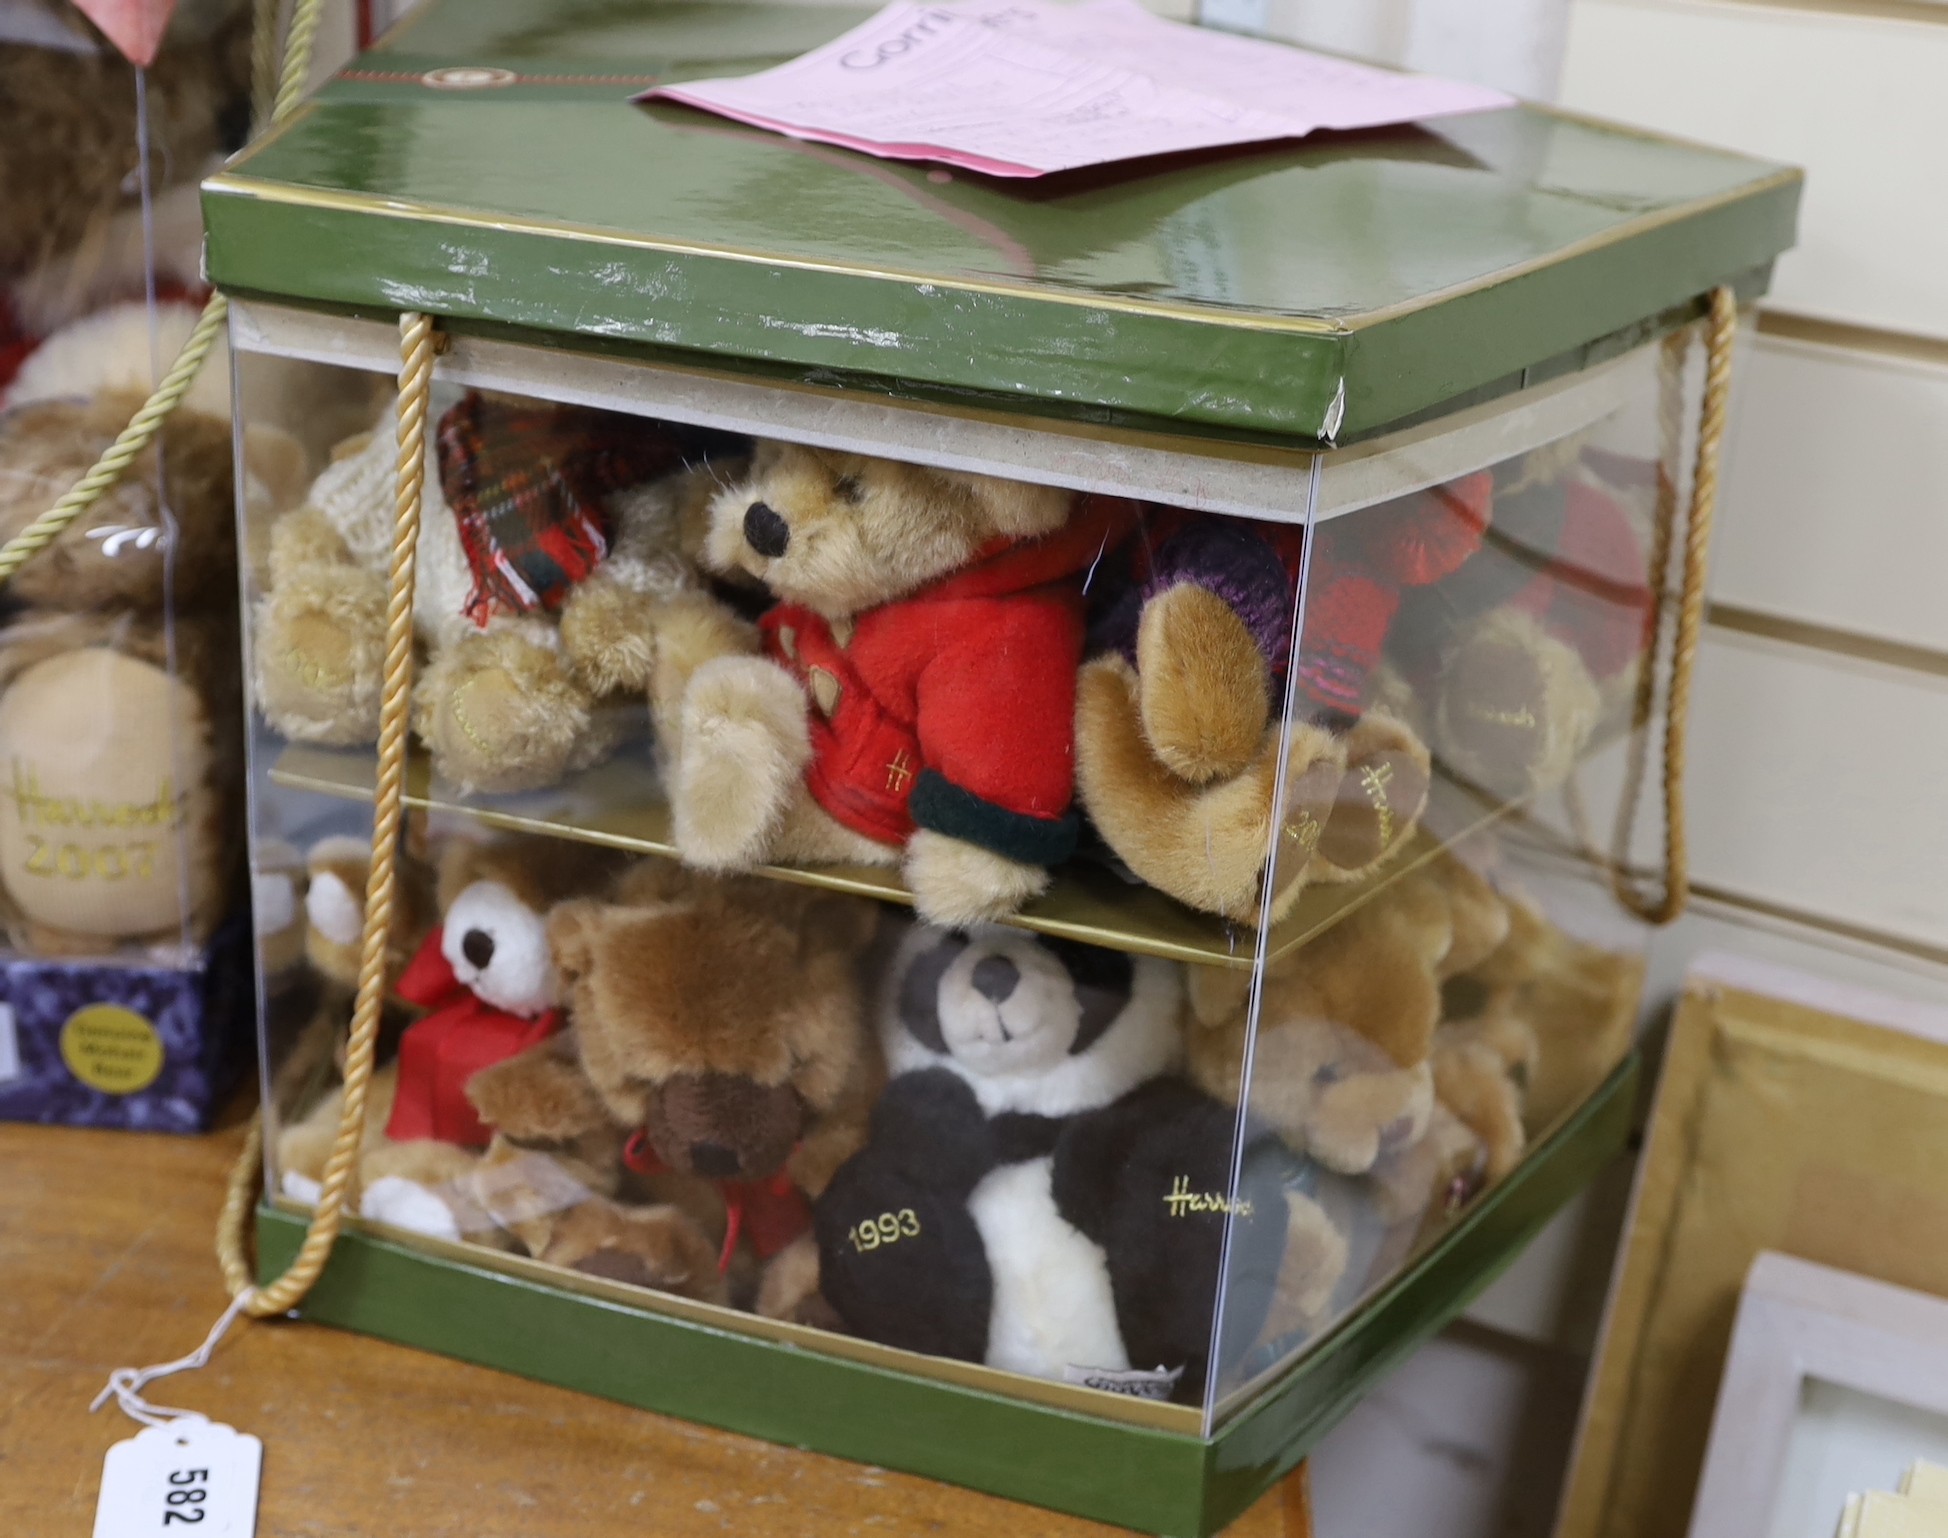 A Harrods limited edition set of 20 dated replica miniature bears from 1986-2005, in original box